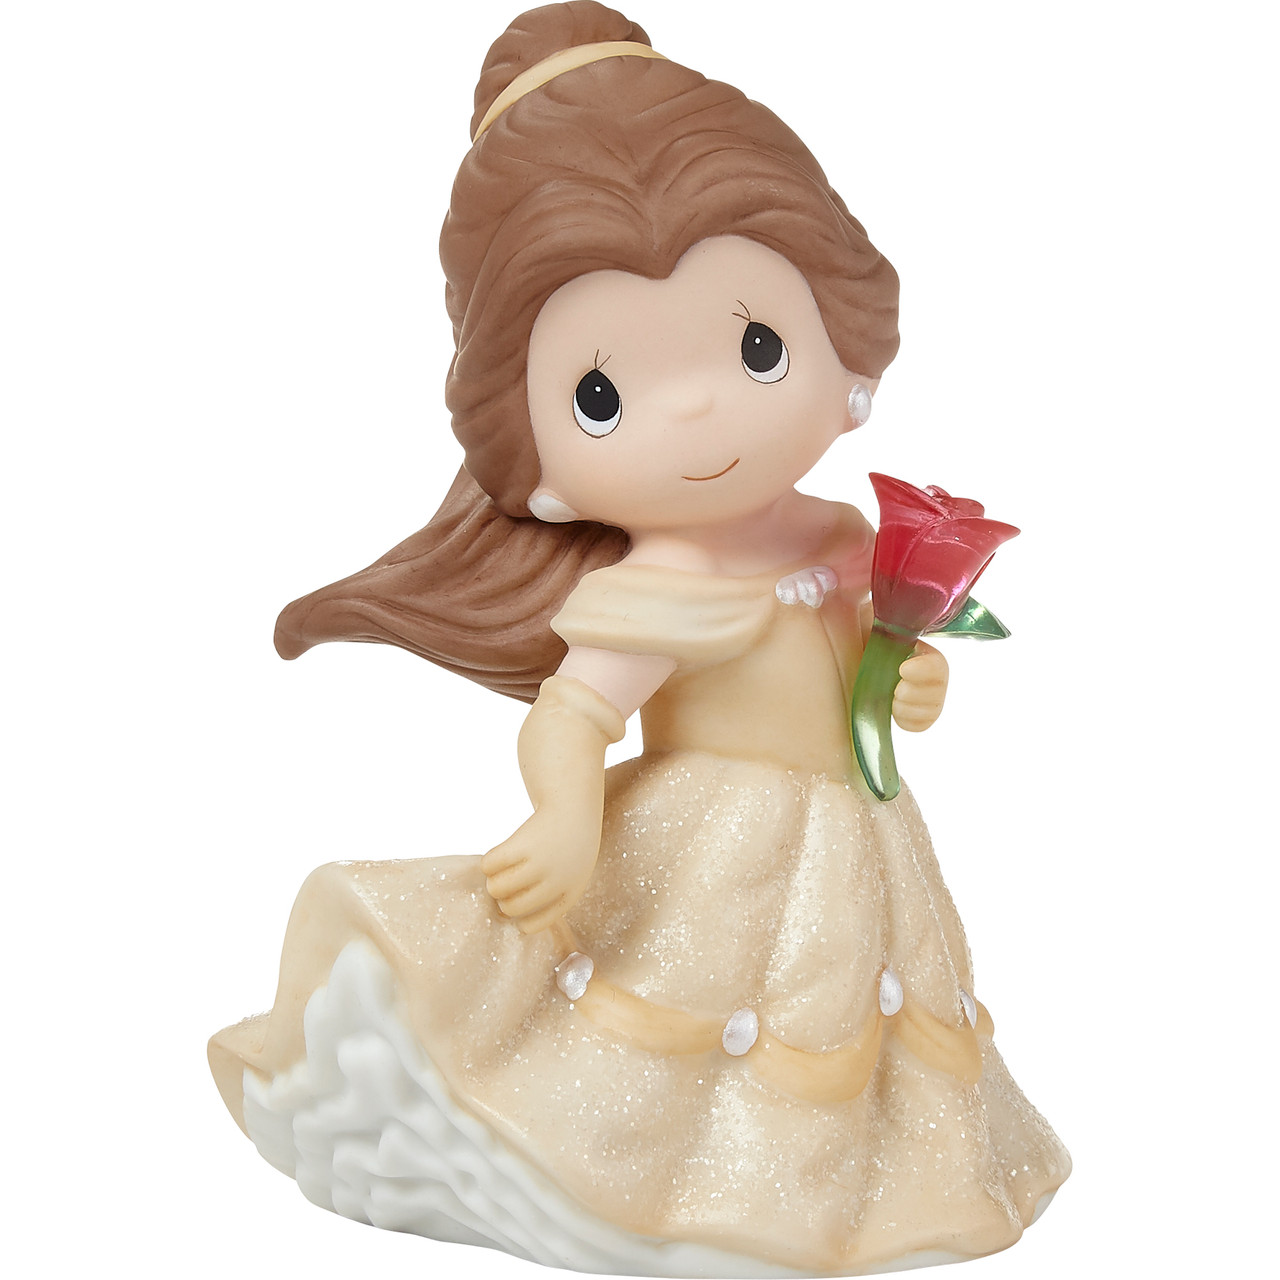 Precious Moments Disney Belle An Enchanting Moment Awaits Figurine #222028 - image 1 of 4